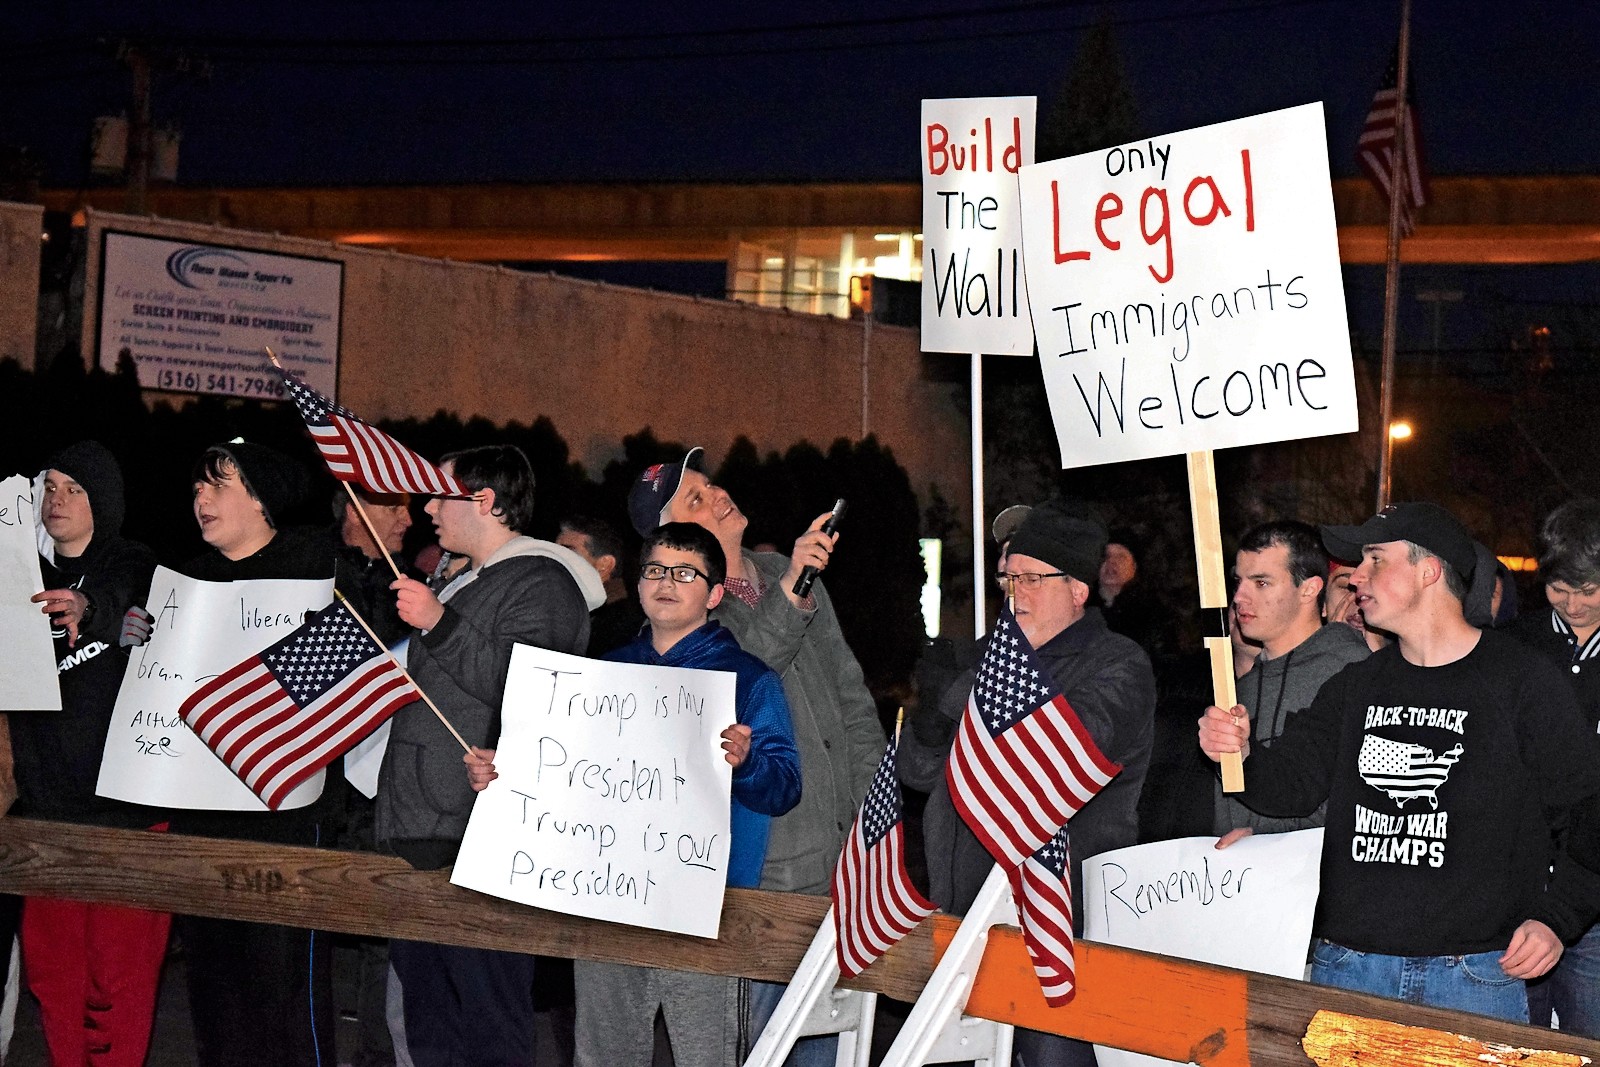 Supporters of the immigration order and President Trump also gathered outside of King’s office.